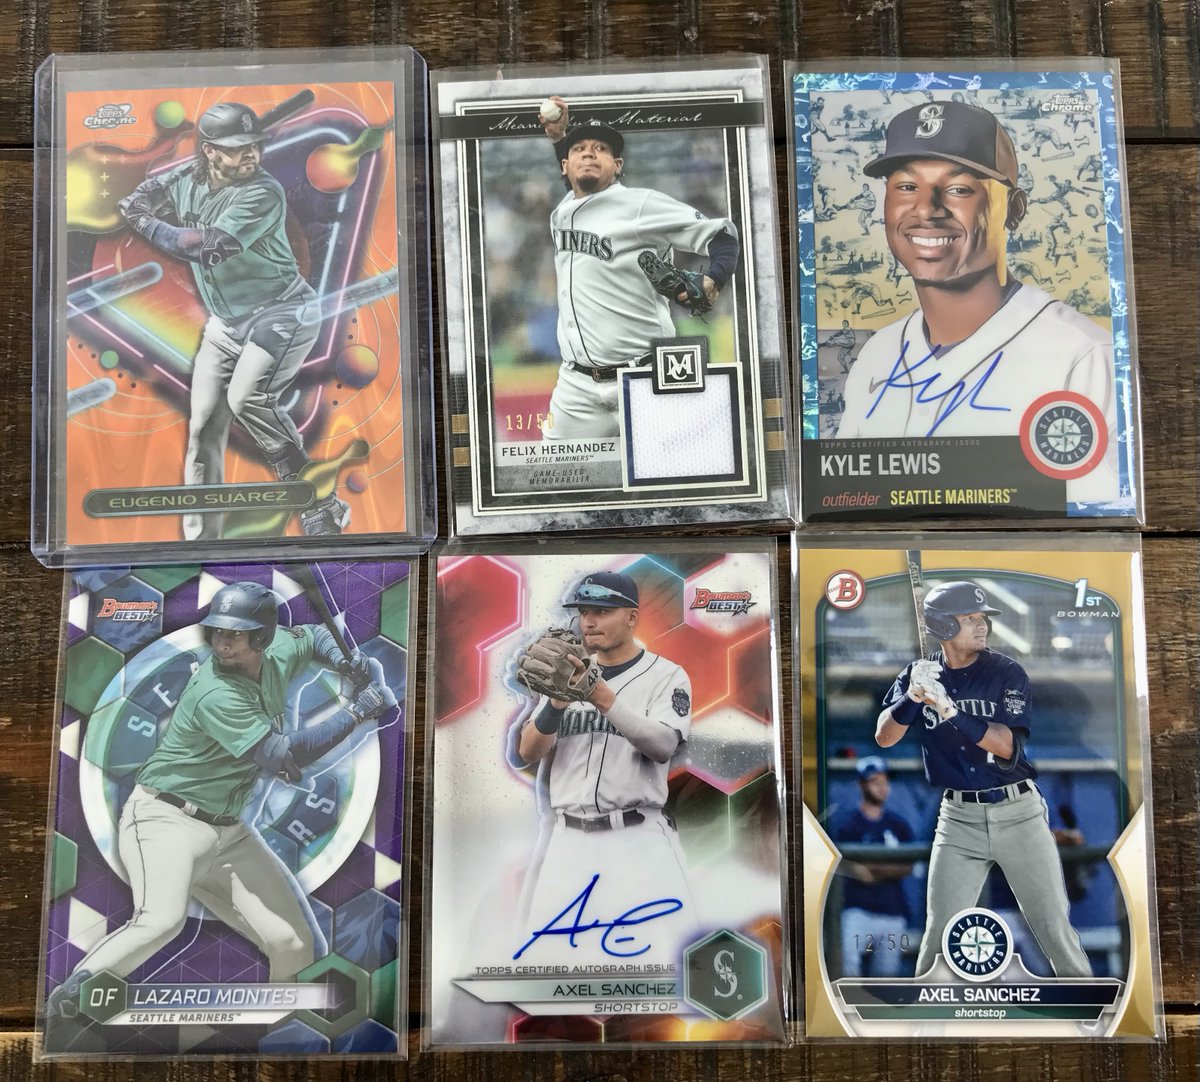 We will be setting up at the Auburn Outlet Mall in Auburn, Washington on Saturday, May 4th. Here are a few new arrivals that we'll have at the show. #baseballcards #baseballcardsforsale #seattle